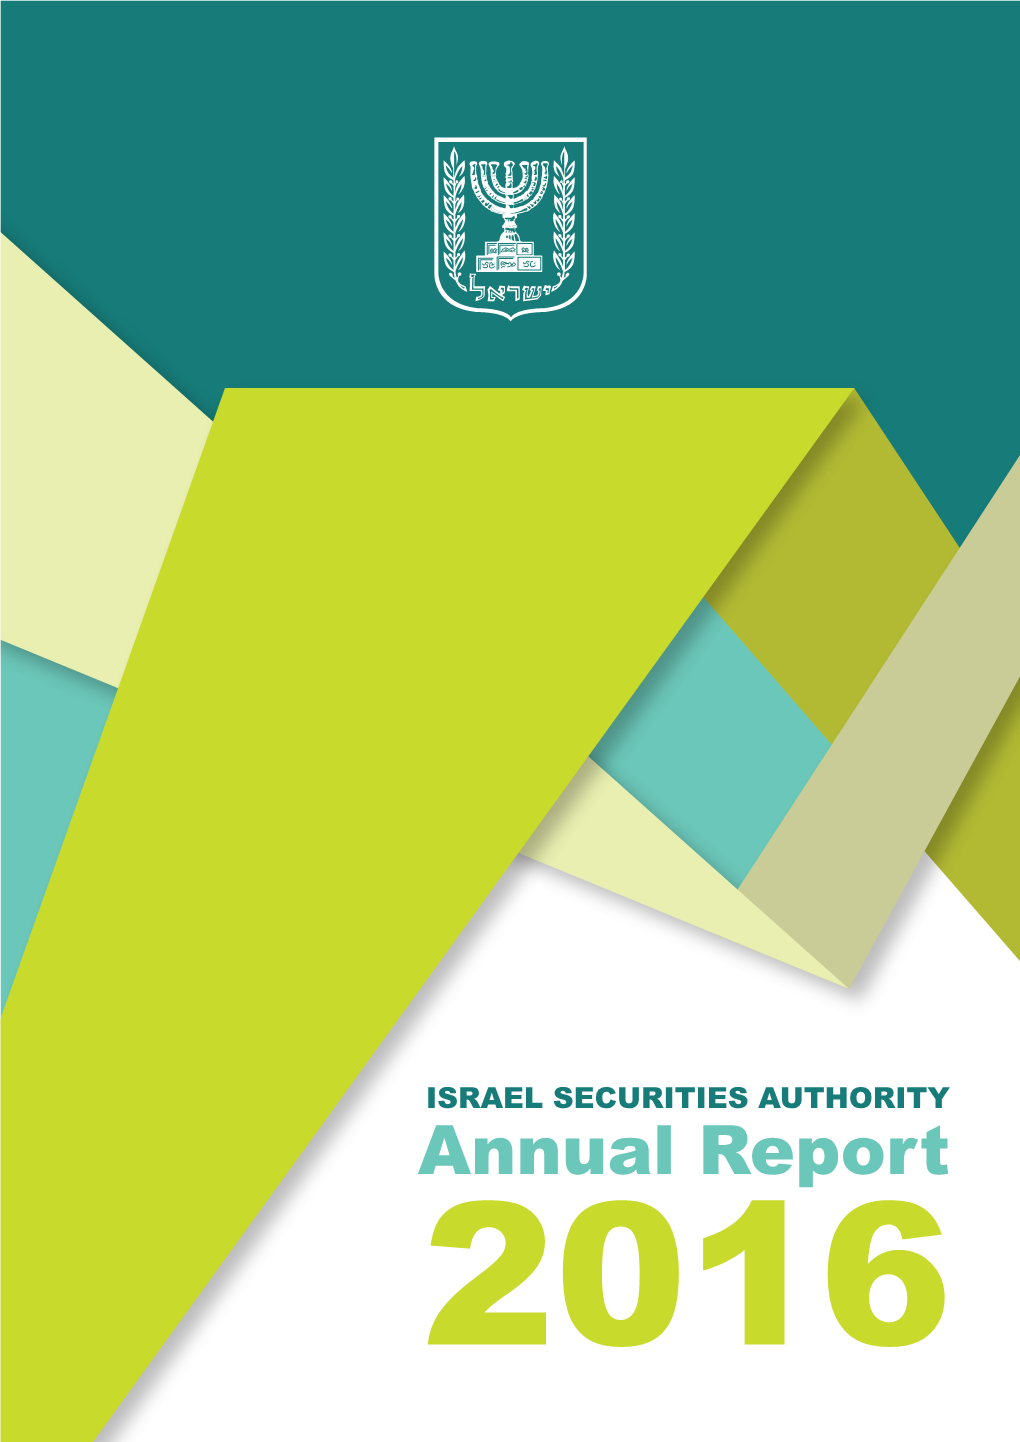 ISRAEL SECURITIES AUTHORITY Annual Report 2016